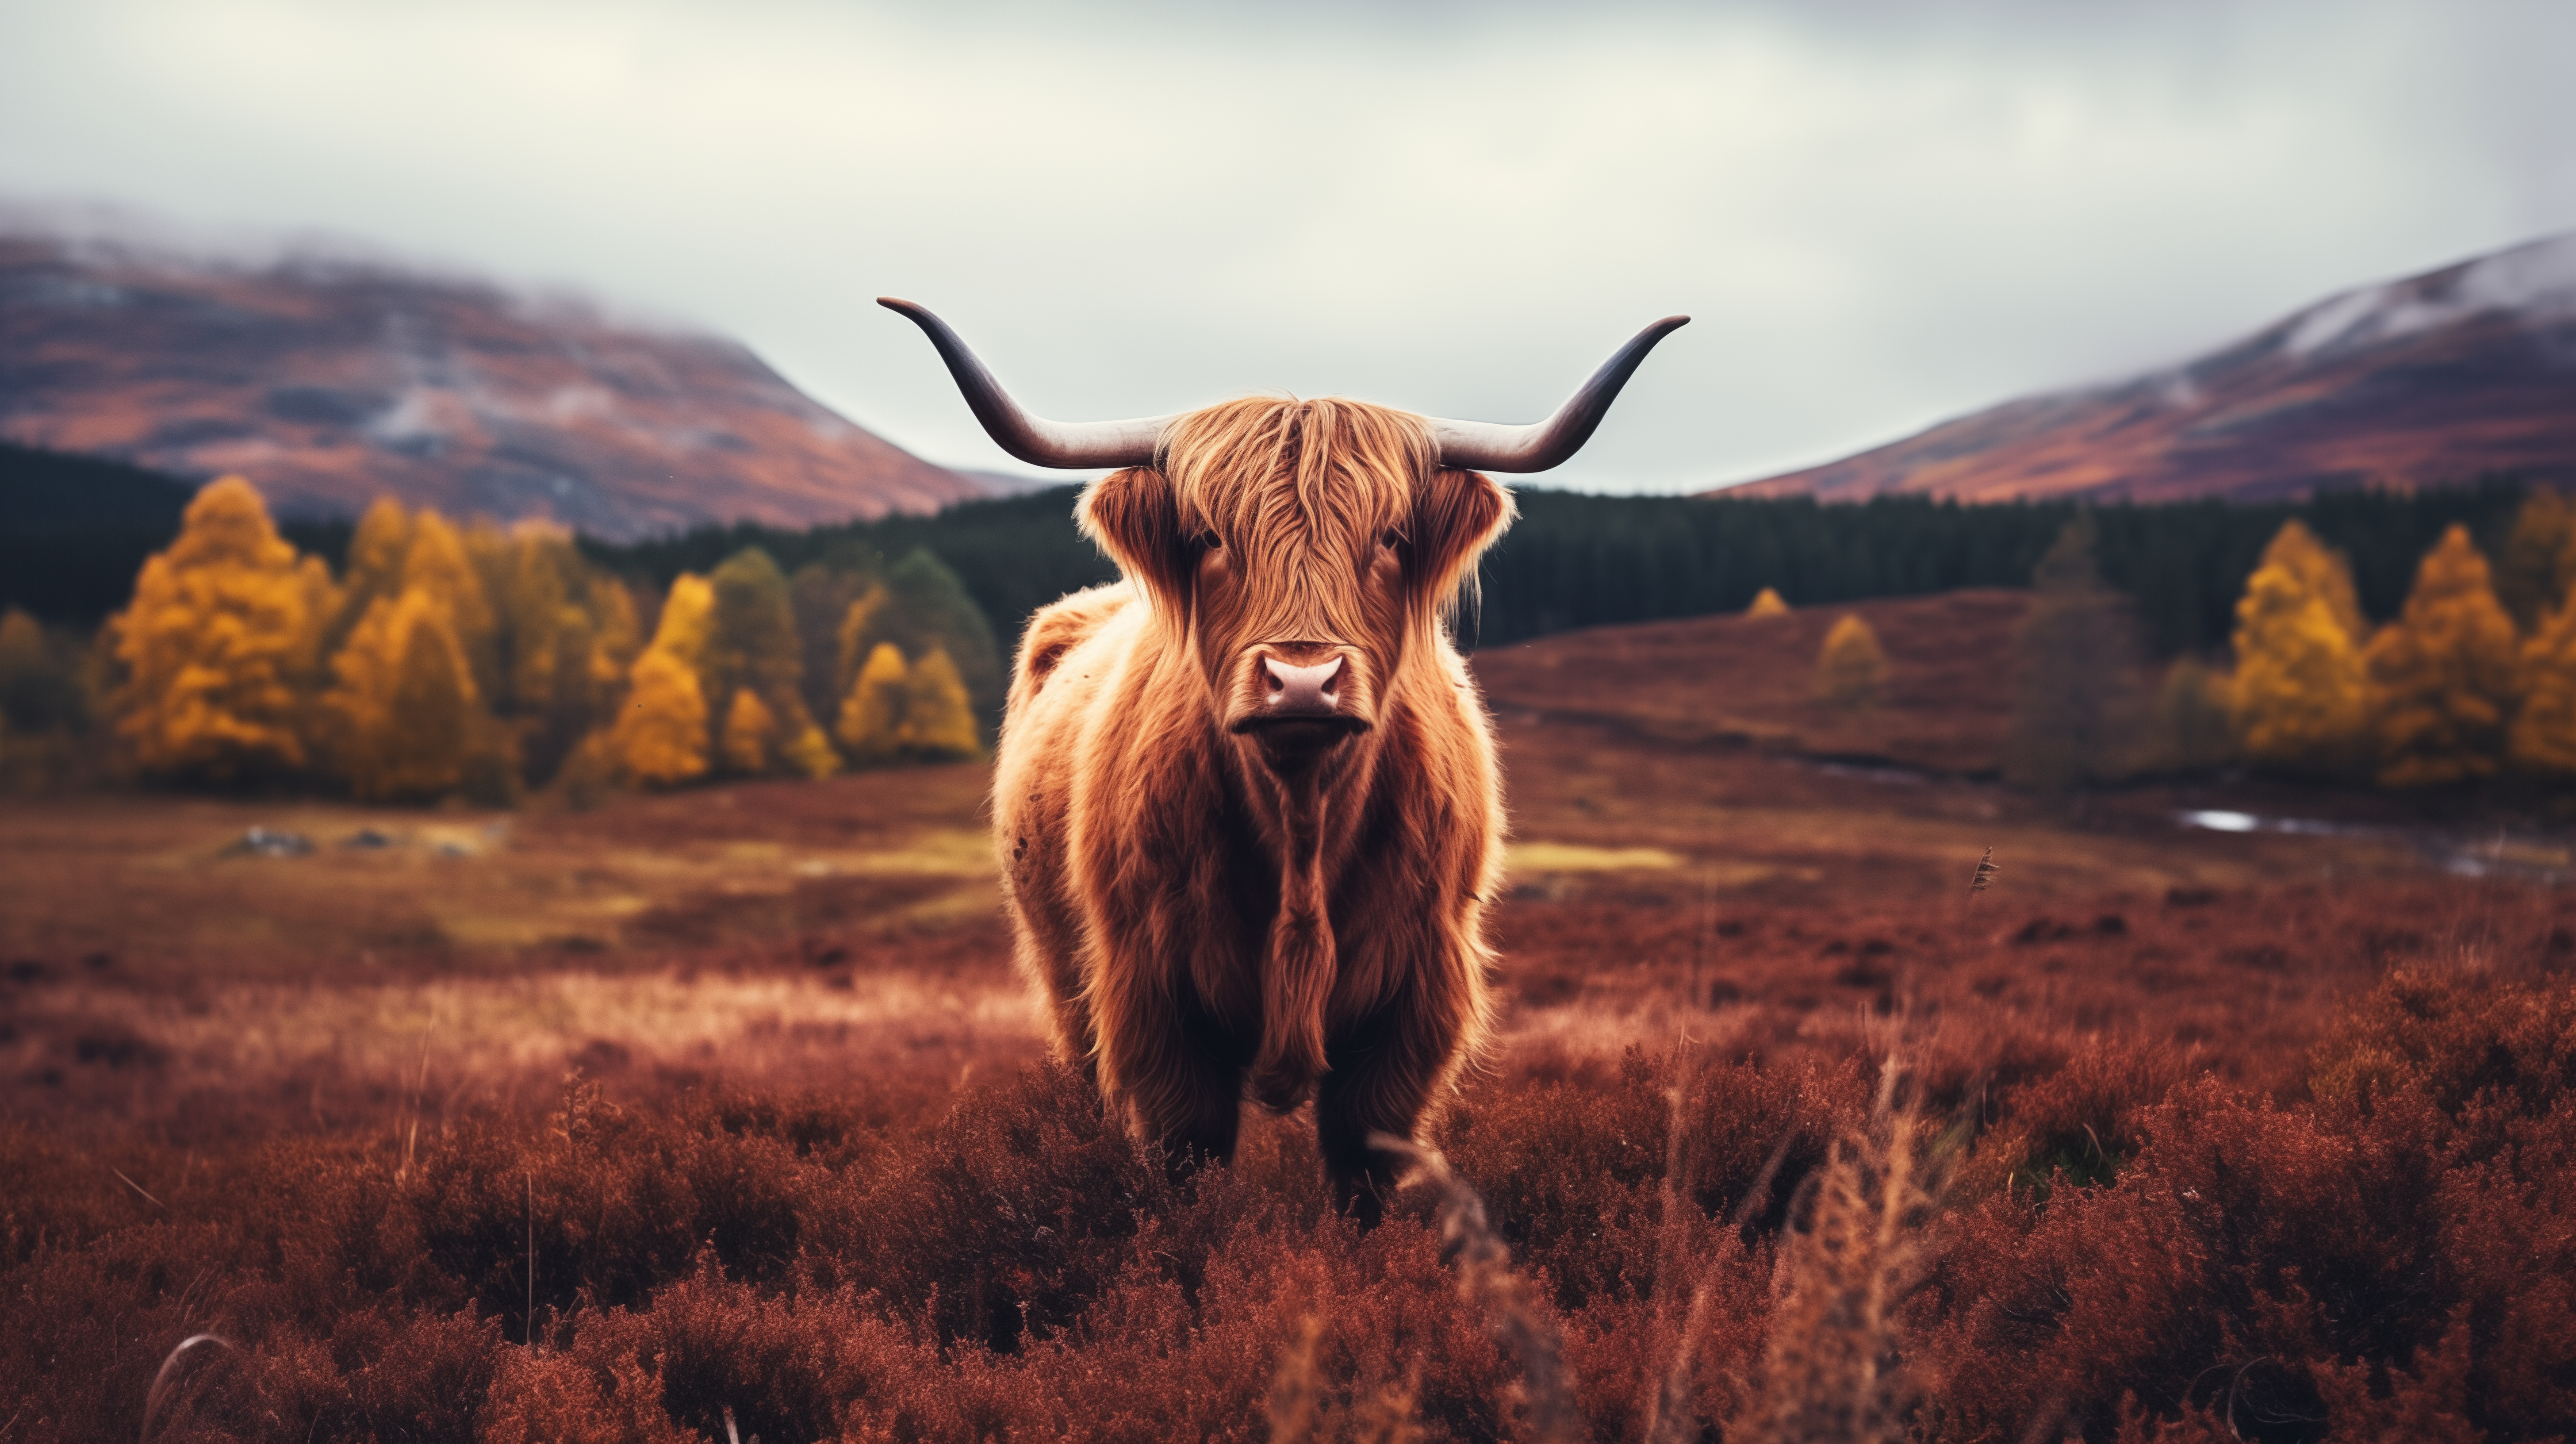 HD wallpaper of a majestic Highland cattle standing in a scenic autumn landscape with colorful foliage in the background.